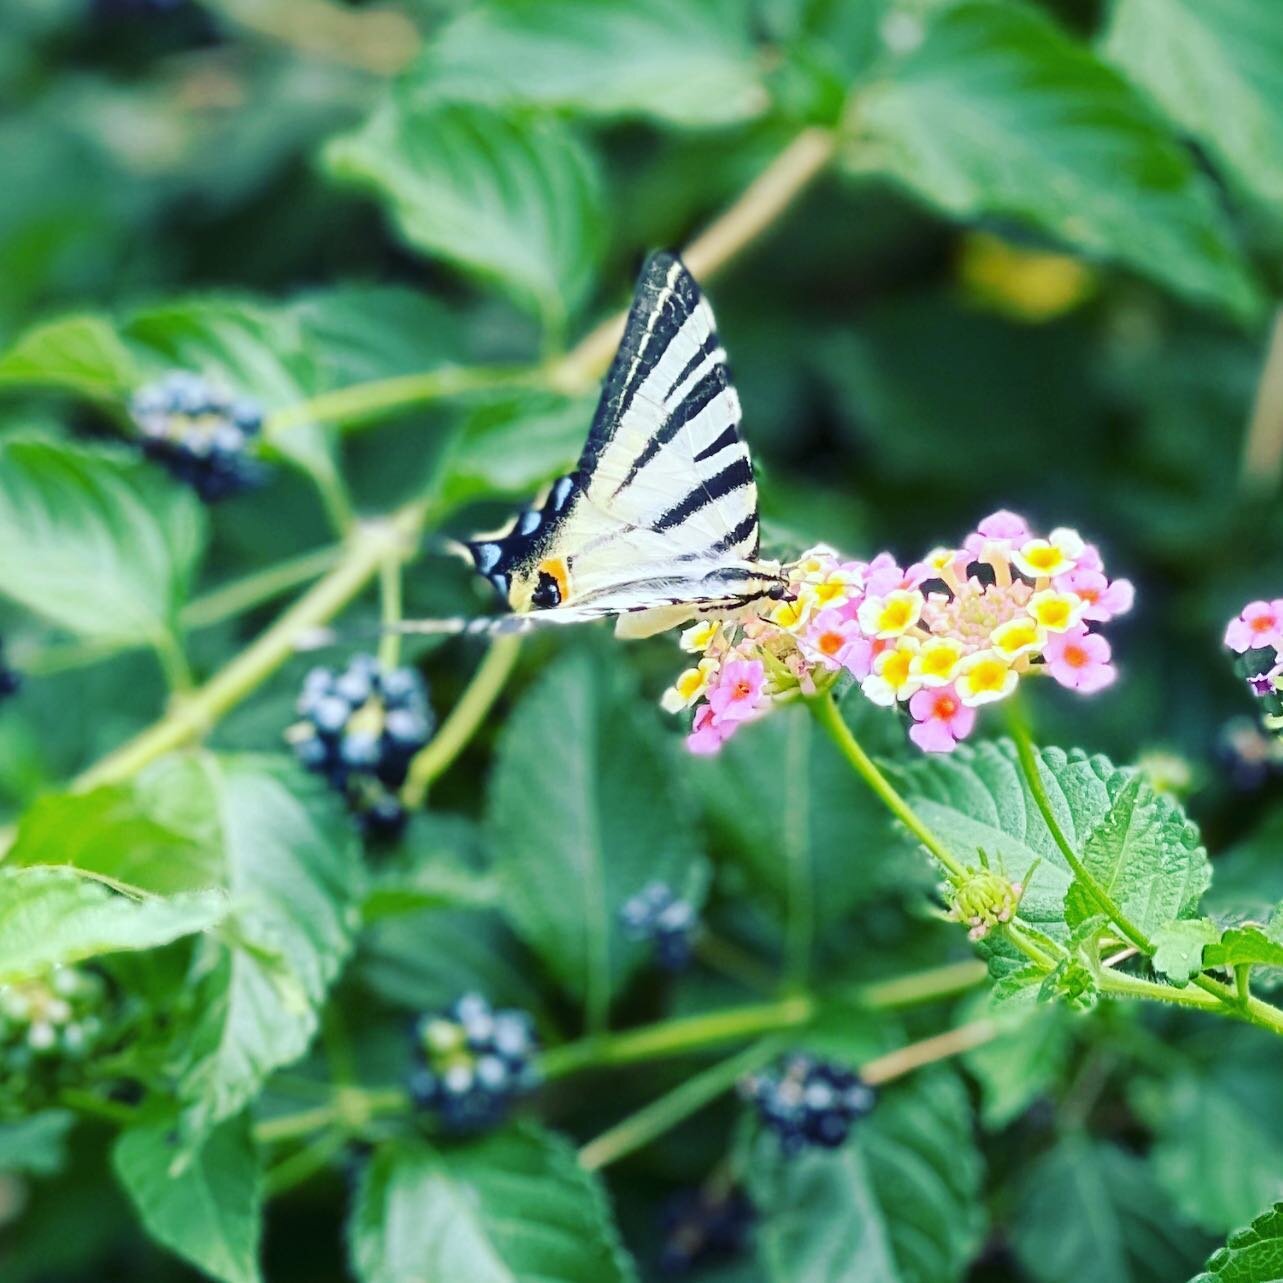 If You Belive in Magic 🦋
Open Your heart and You&rsquo;ll see ❤️✨

#belive #magic #ifyoucandreamityoucandoit #butterfly #bliss #bethechange #inspiration #glede #croatia #holiday #beuforever #kroppogsinnibalanse